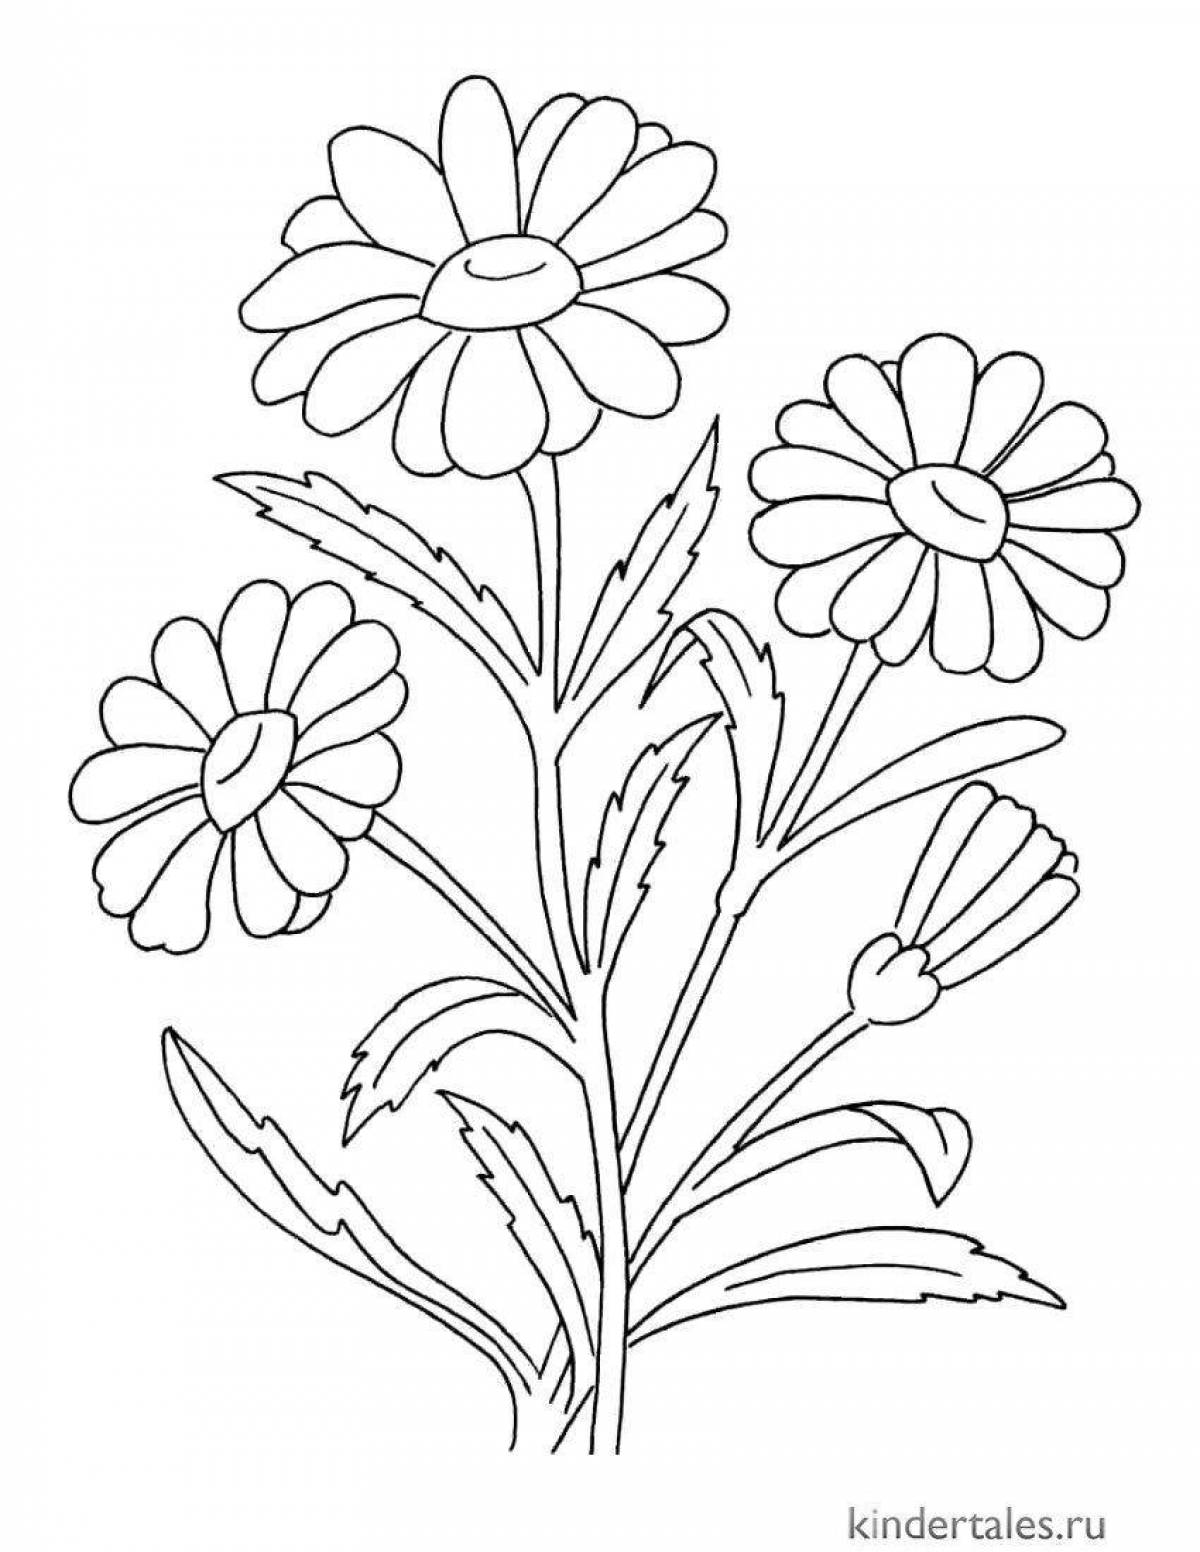 Exquisite chamomile flower coloring for juniors